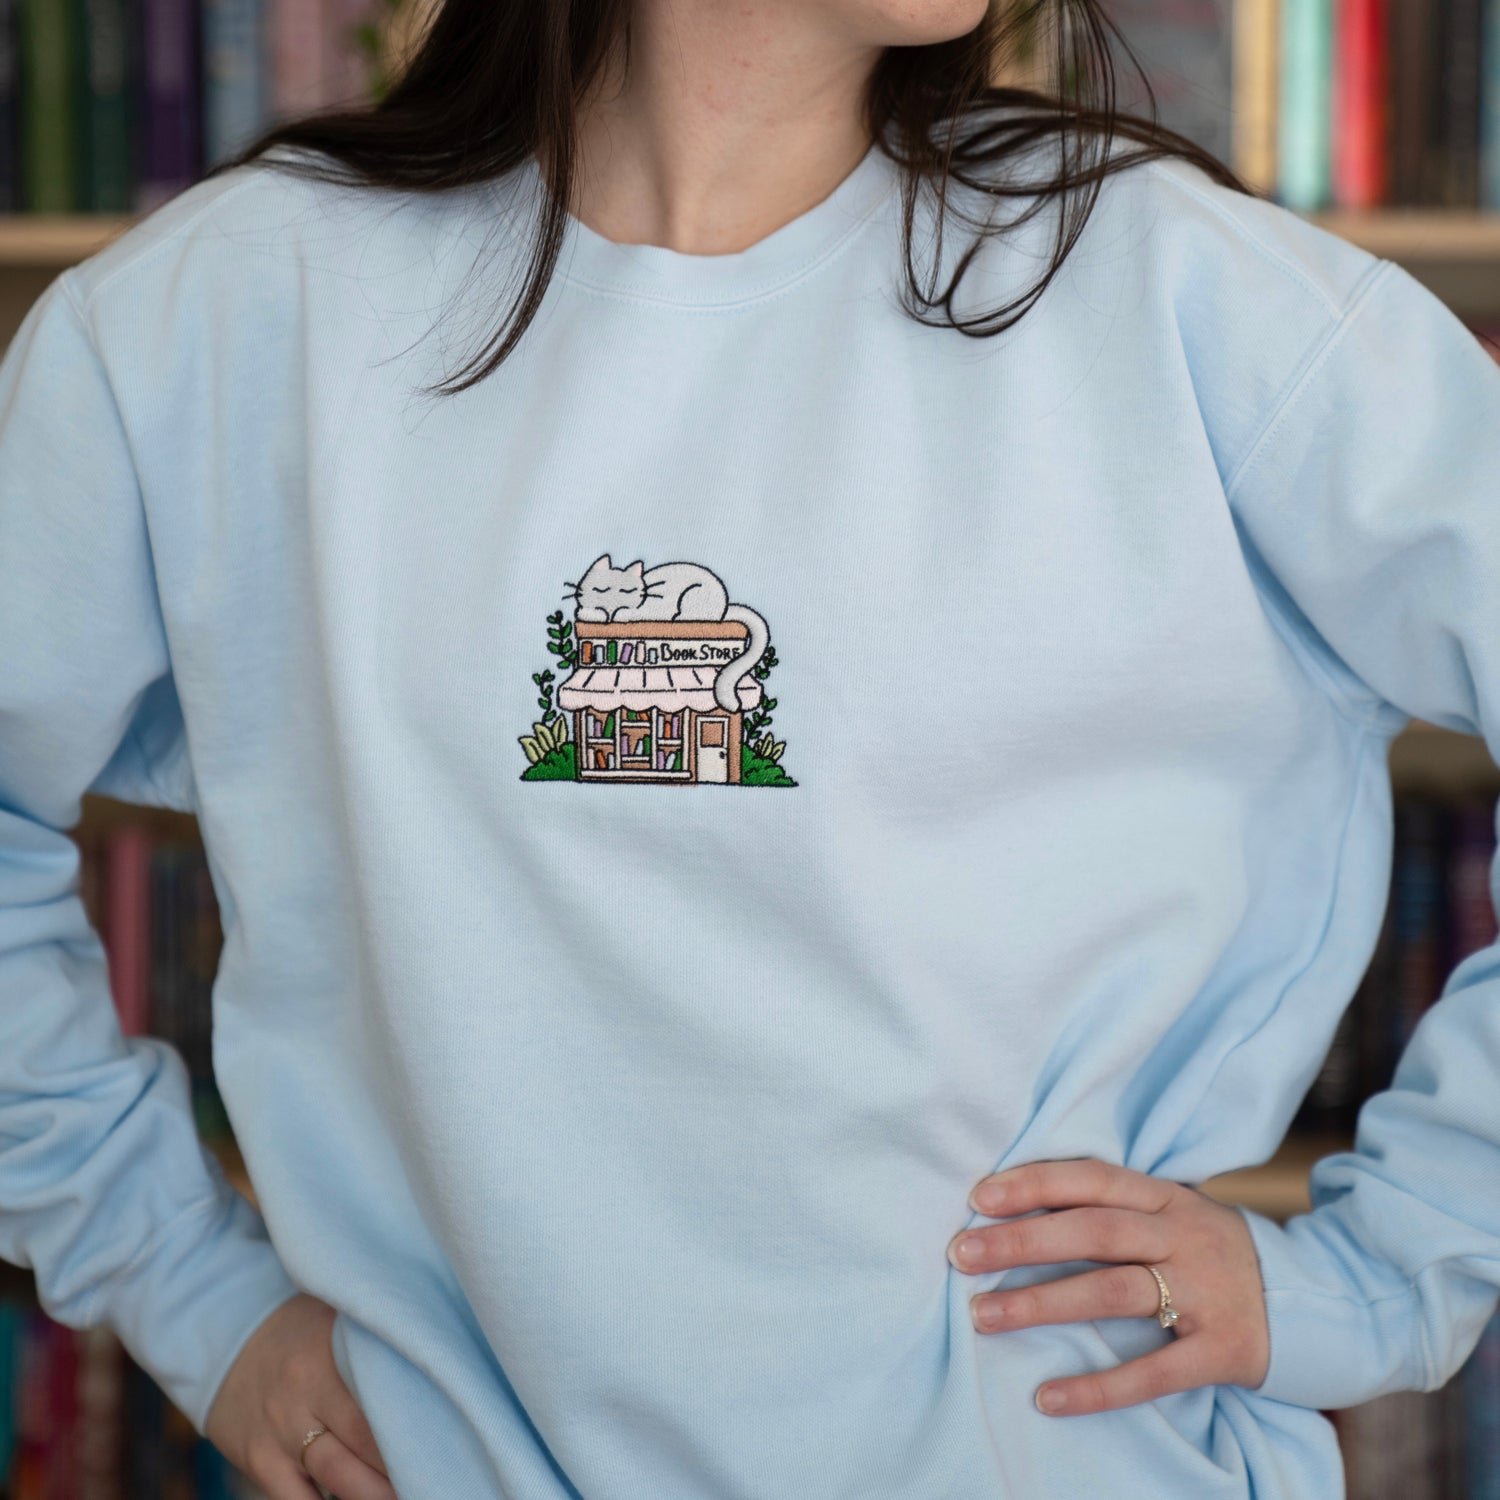 Embroidered Book Sweatshirts and Totes!